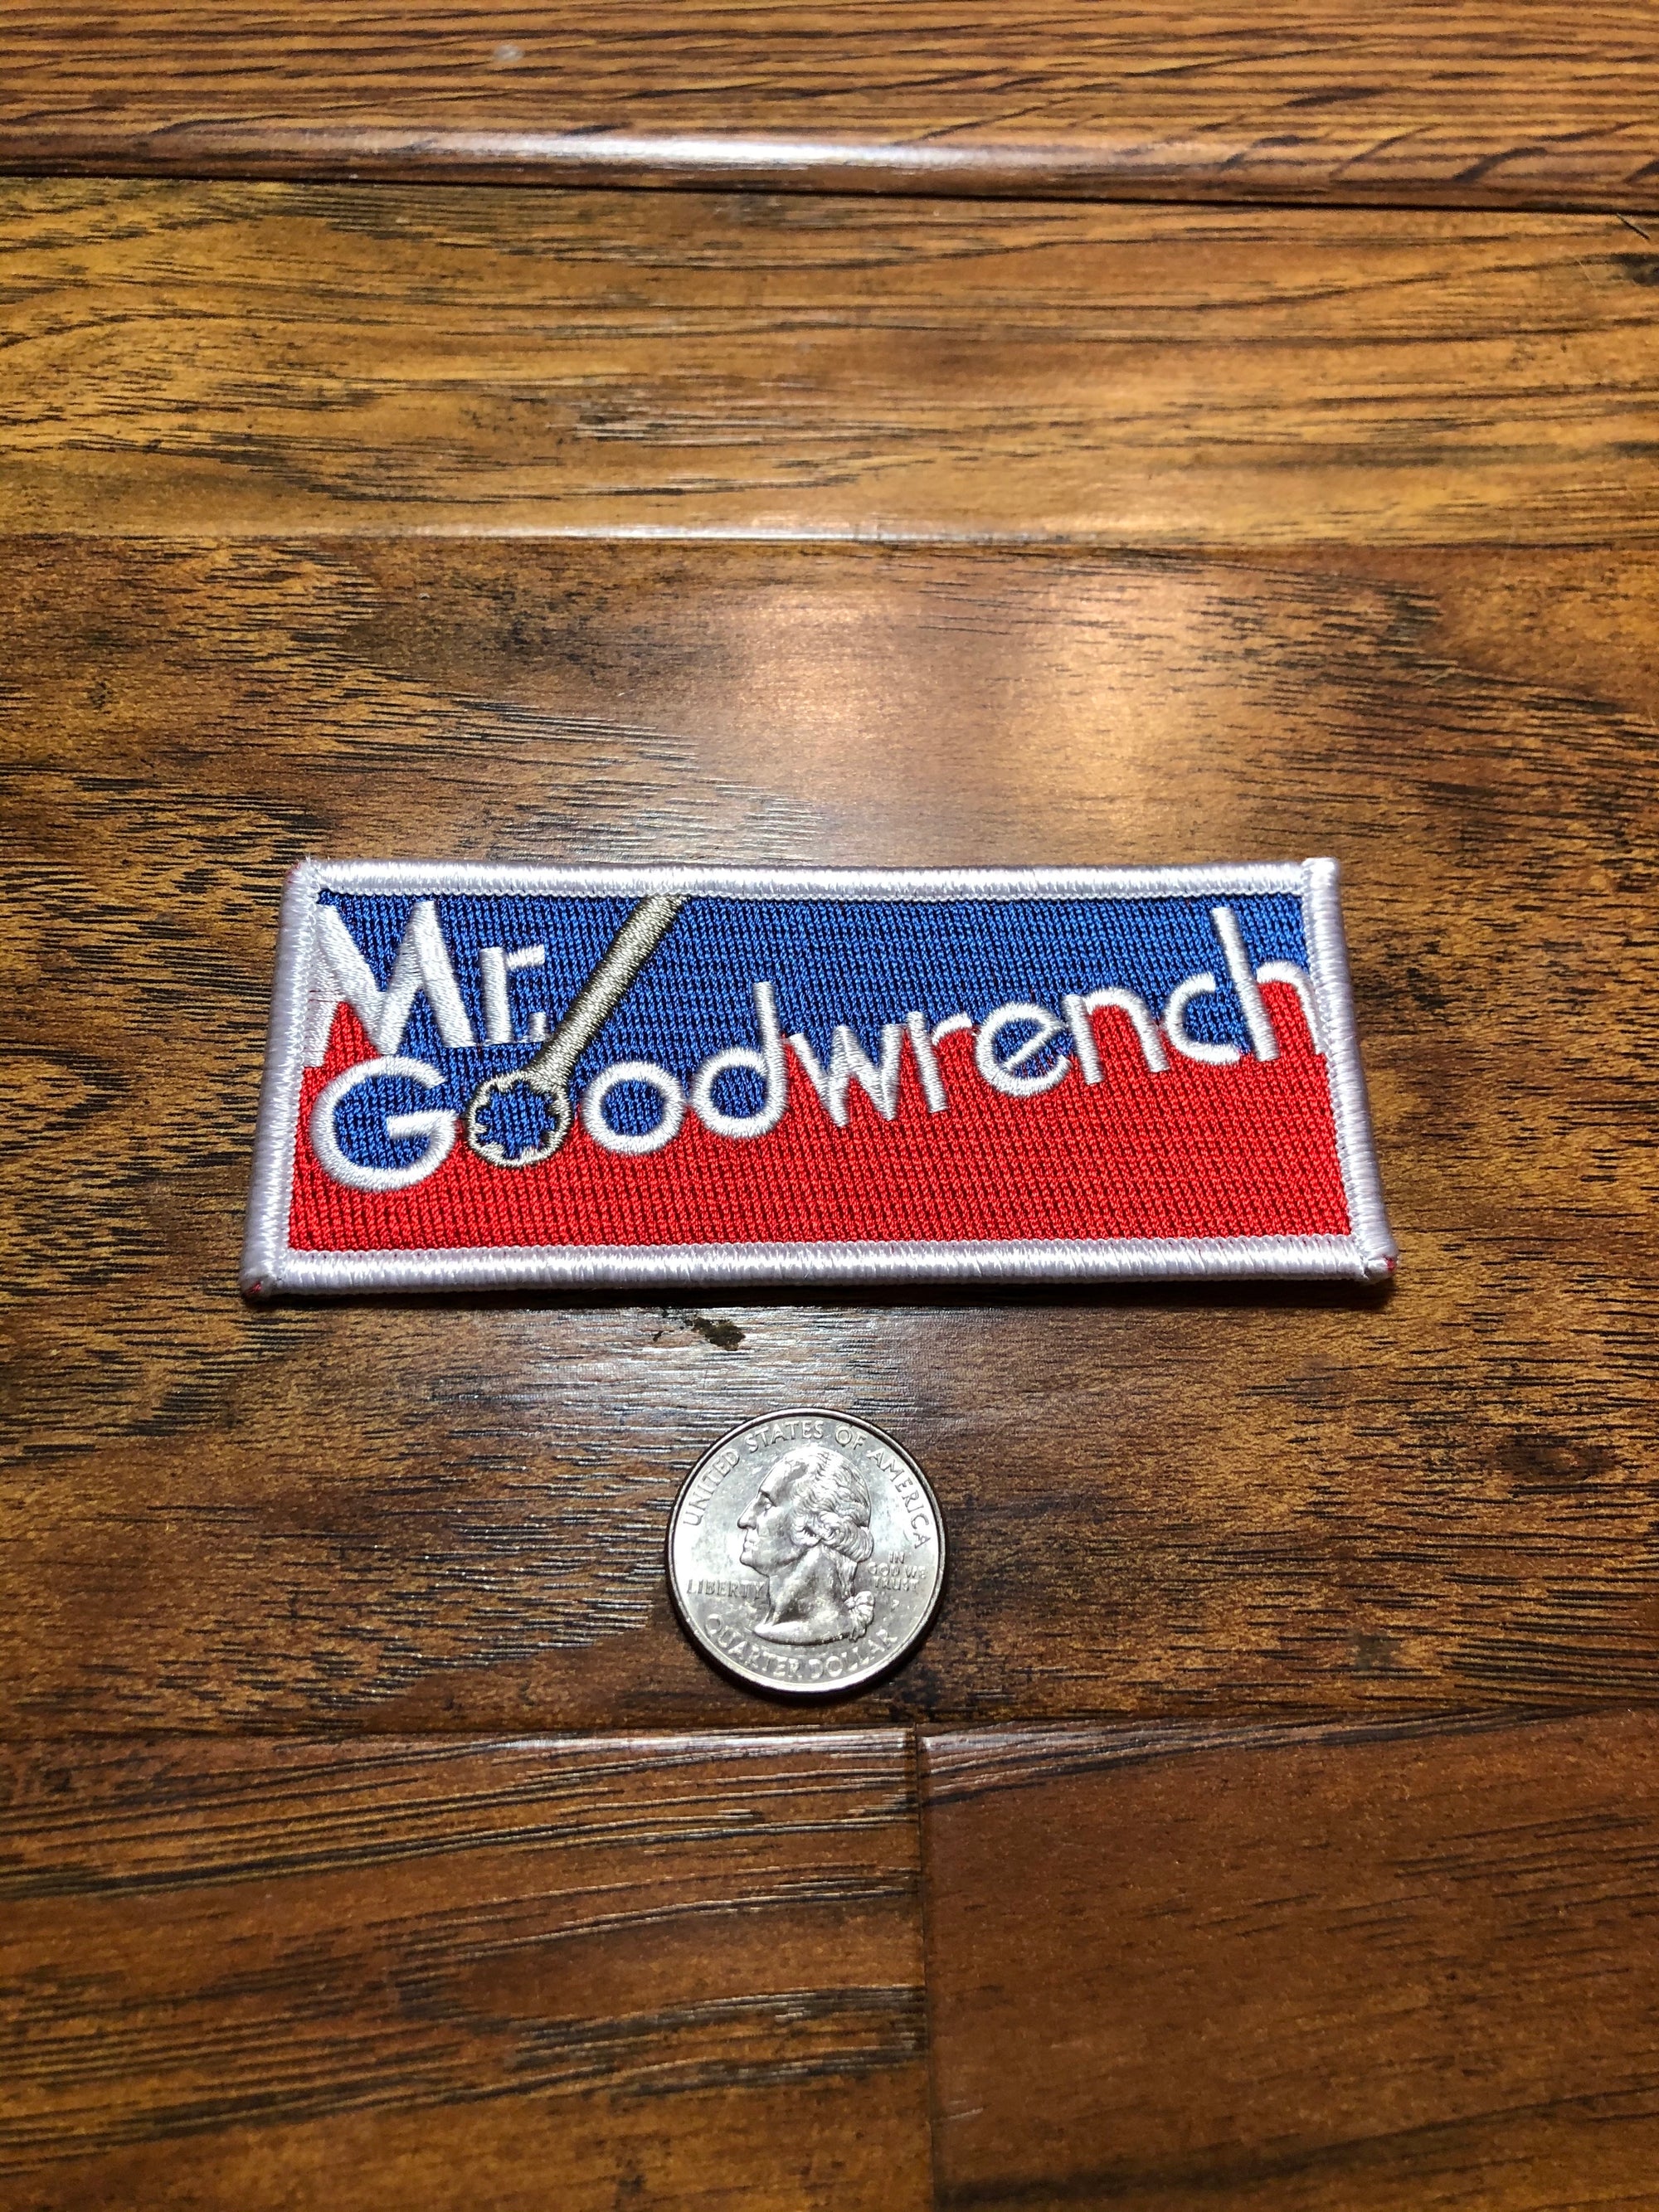 Mr. GoodWrench